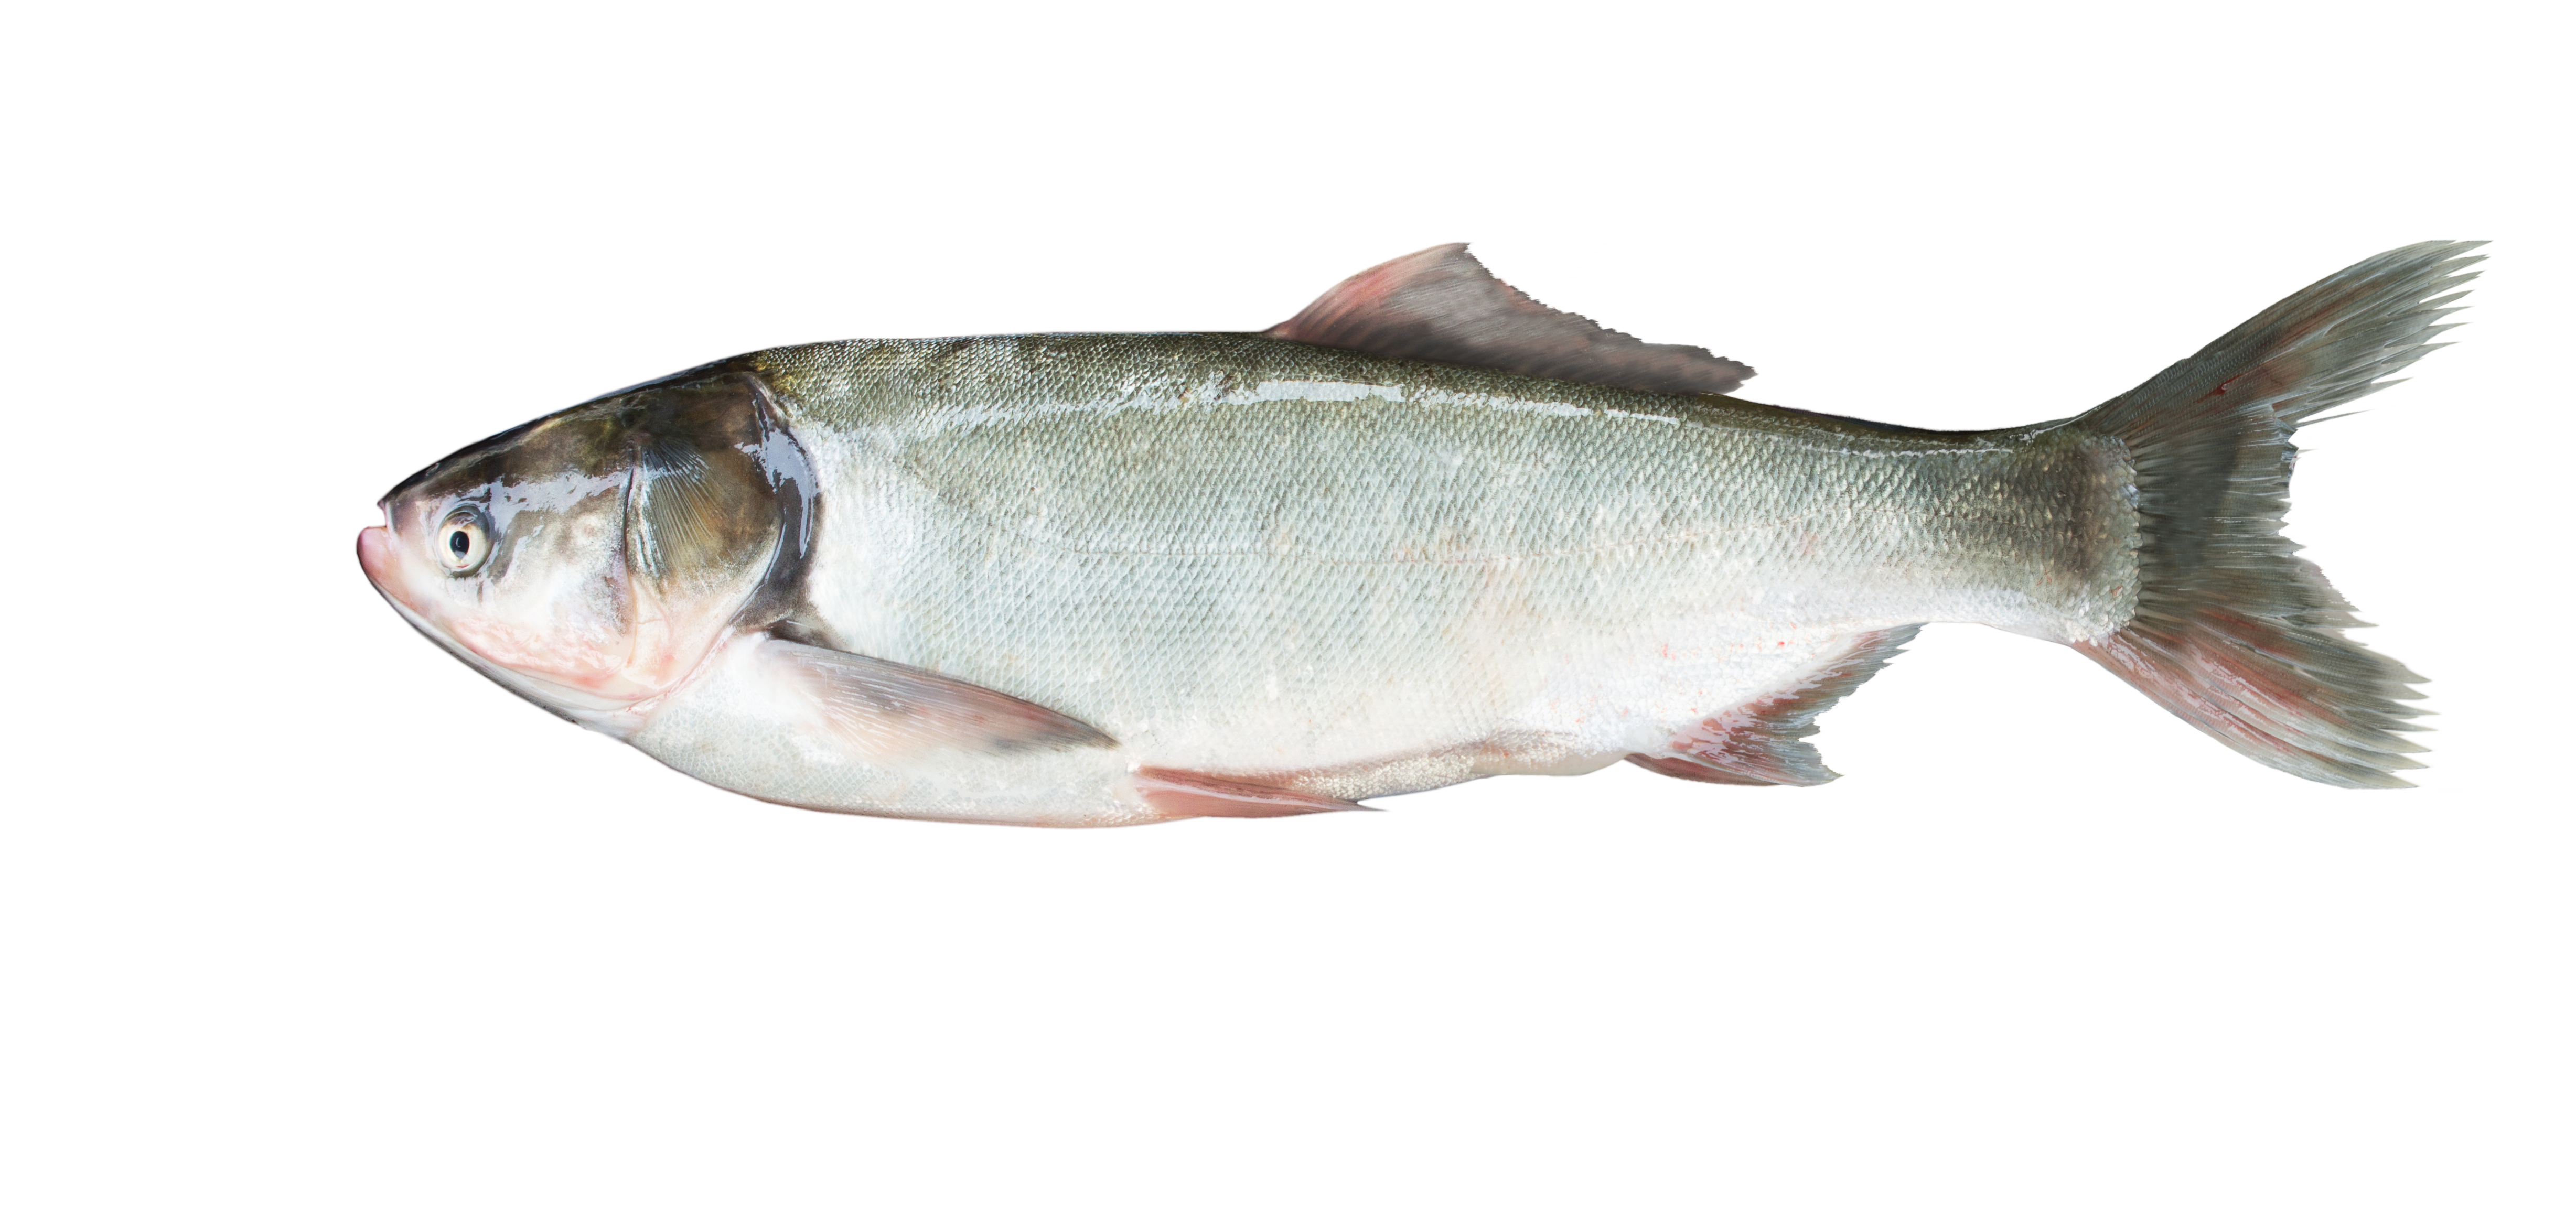 A silver carp on a white background | Source: Shutterstock